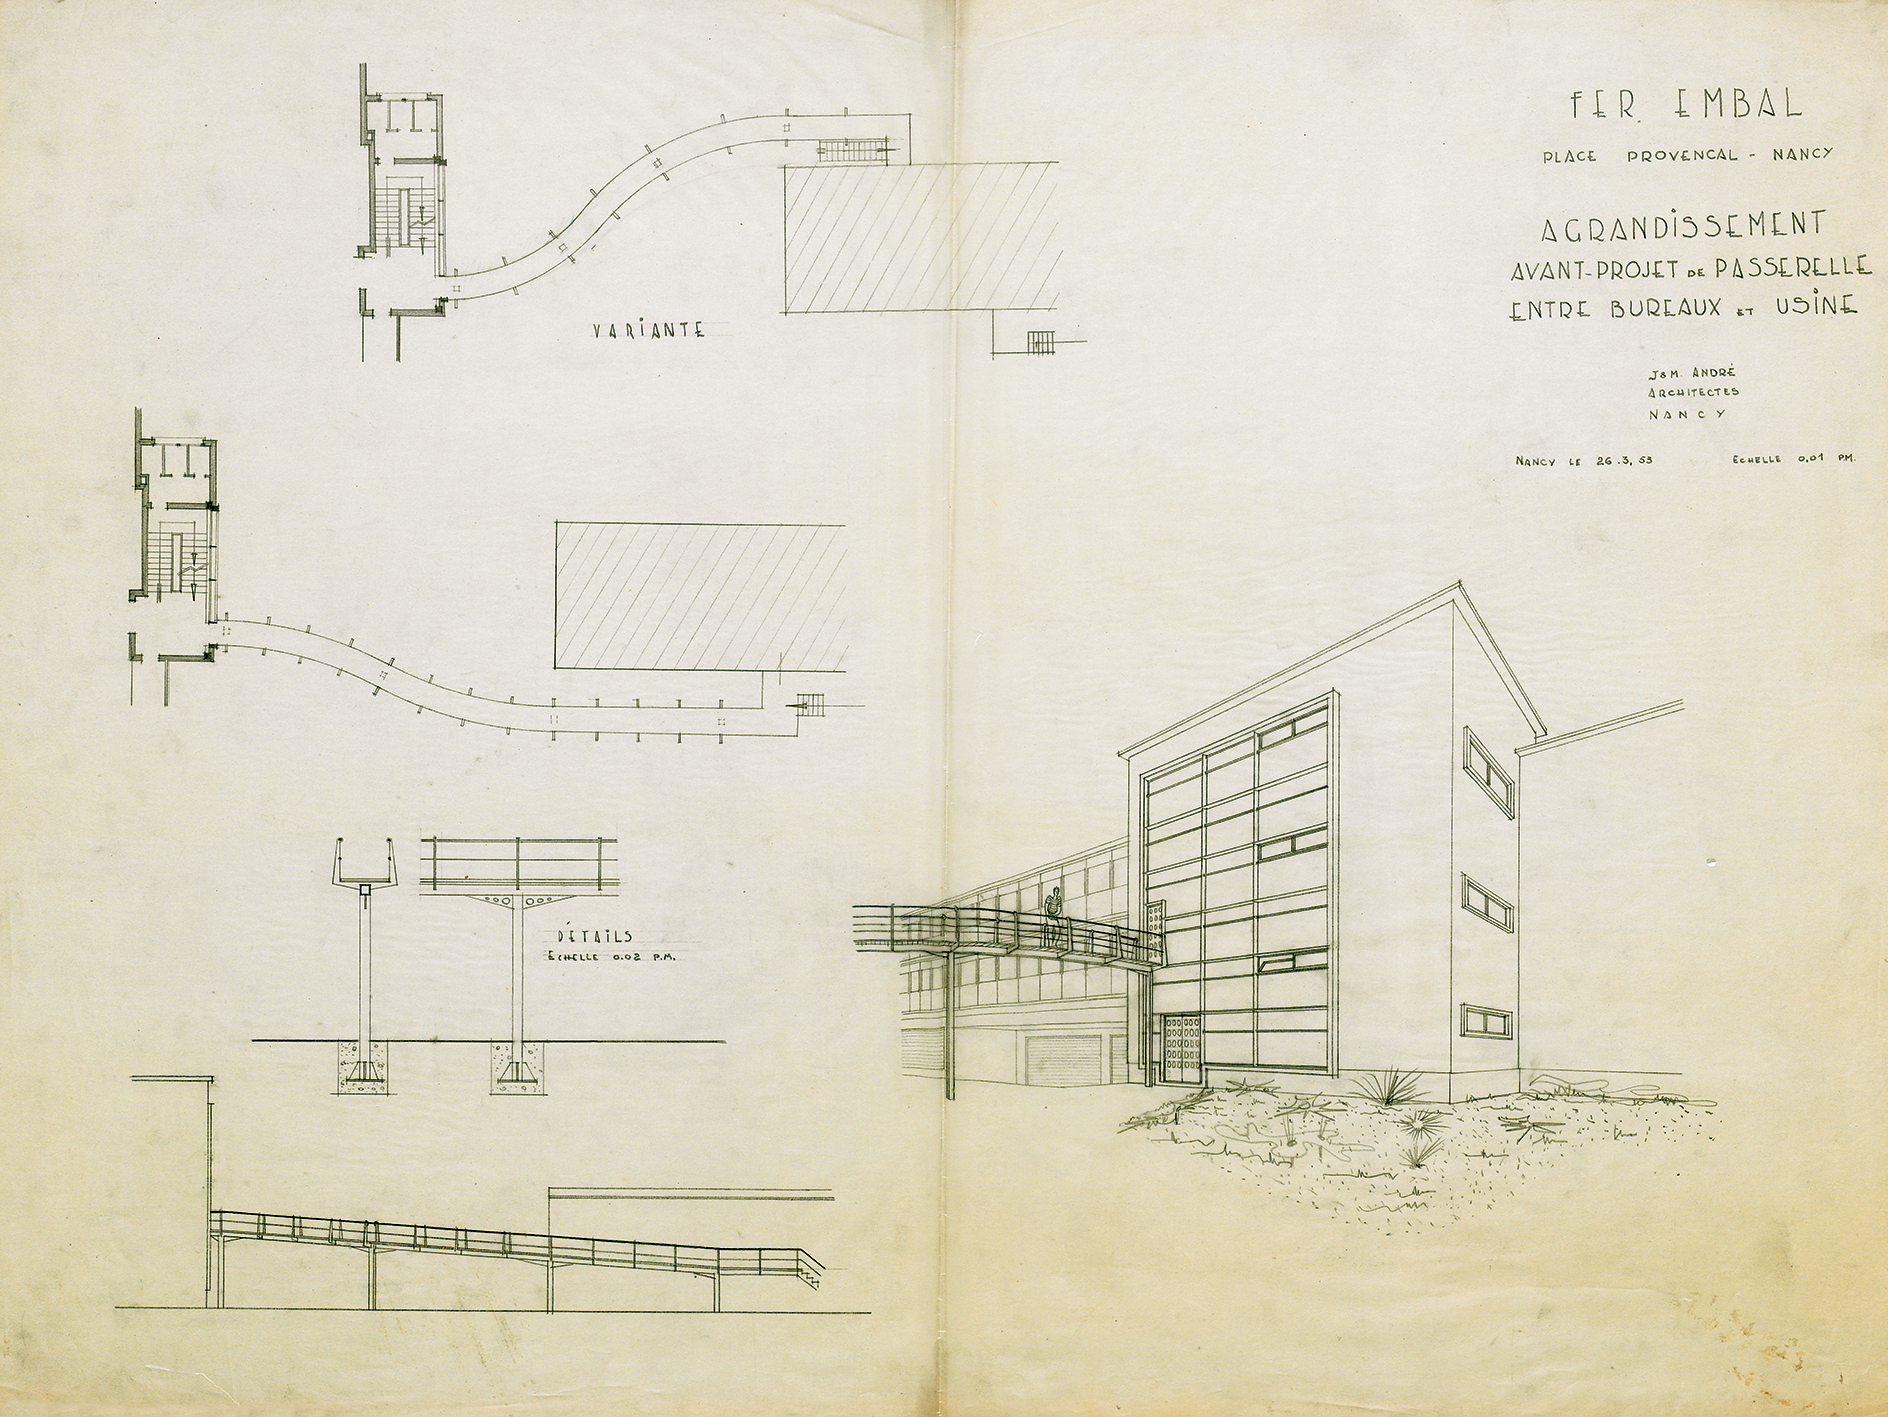 Ferembal factory, Nancy. Plans for extension of the workshops, with a walkway between the offices and the factory, 1952 (architects J. and M. André).